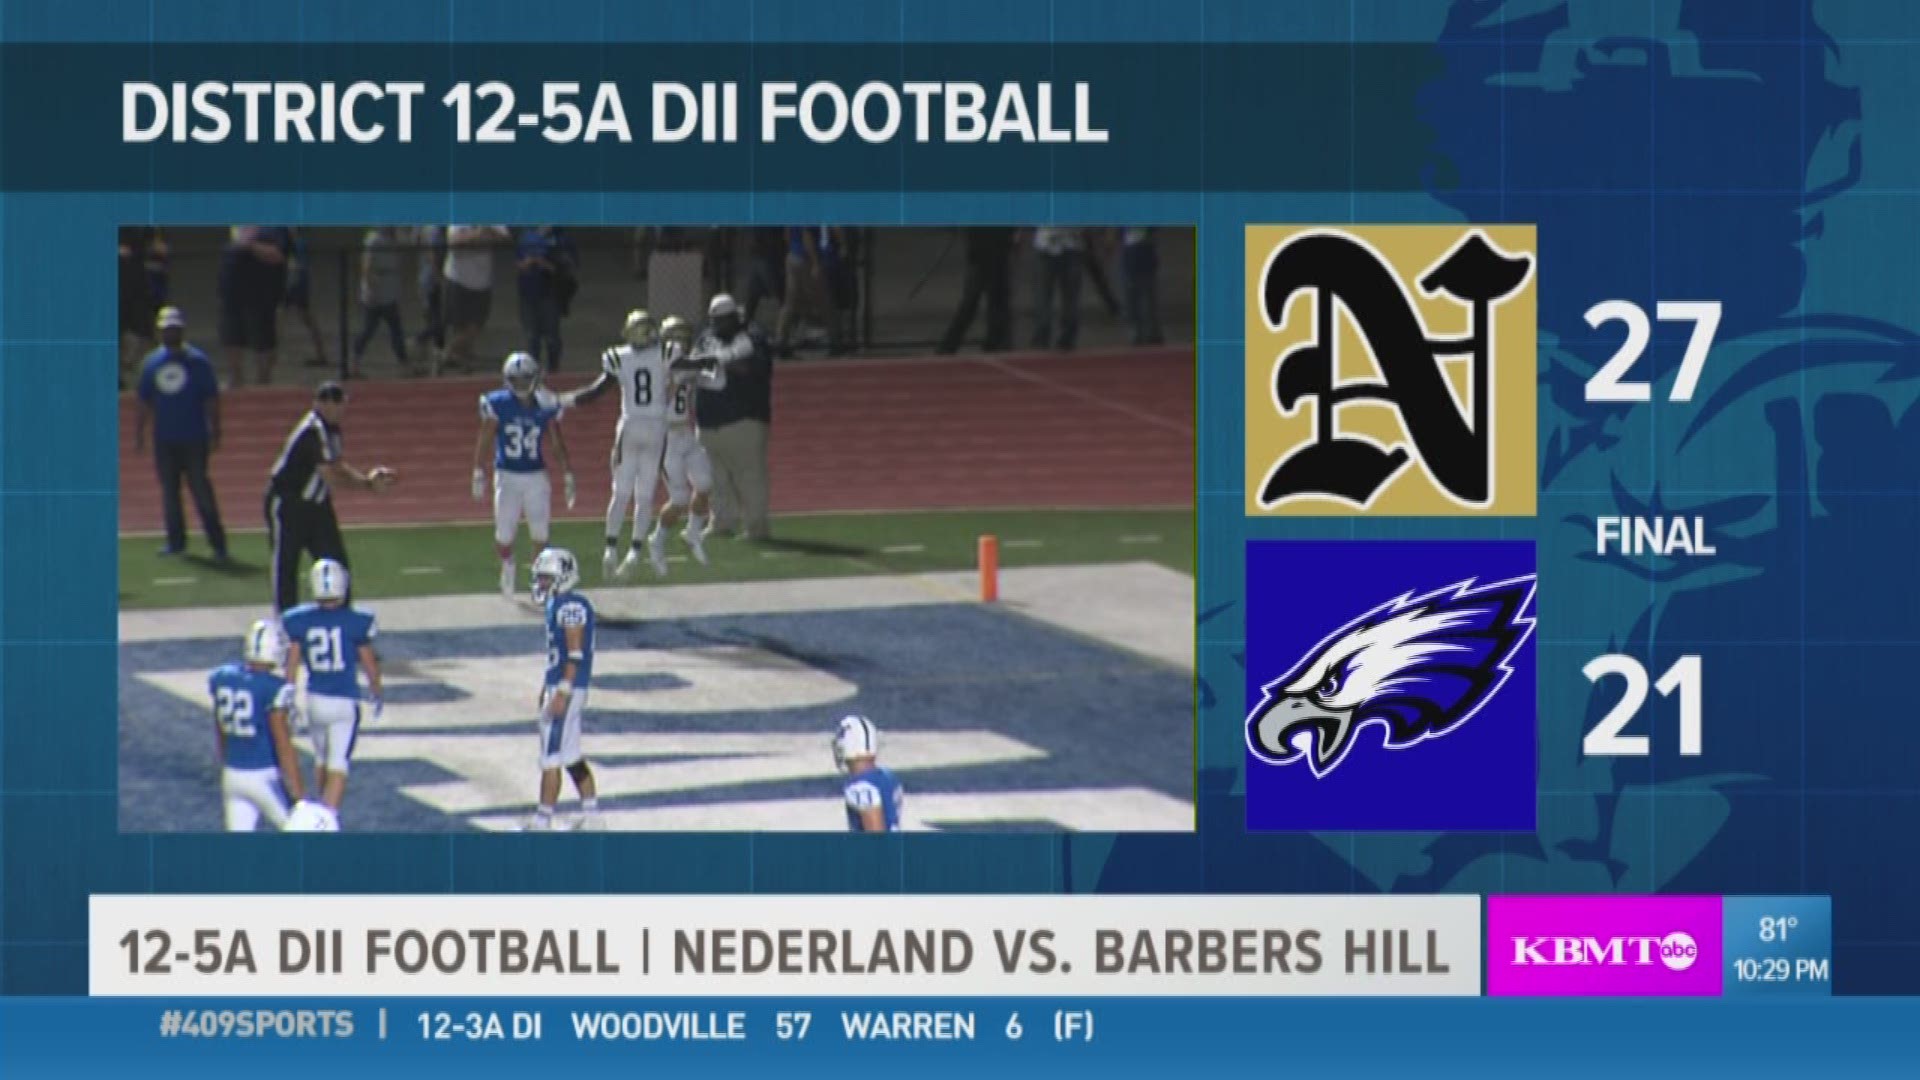 WEEK 6: Nederland takes down Barbers Hill 27 - 21